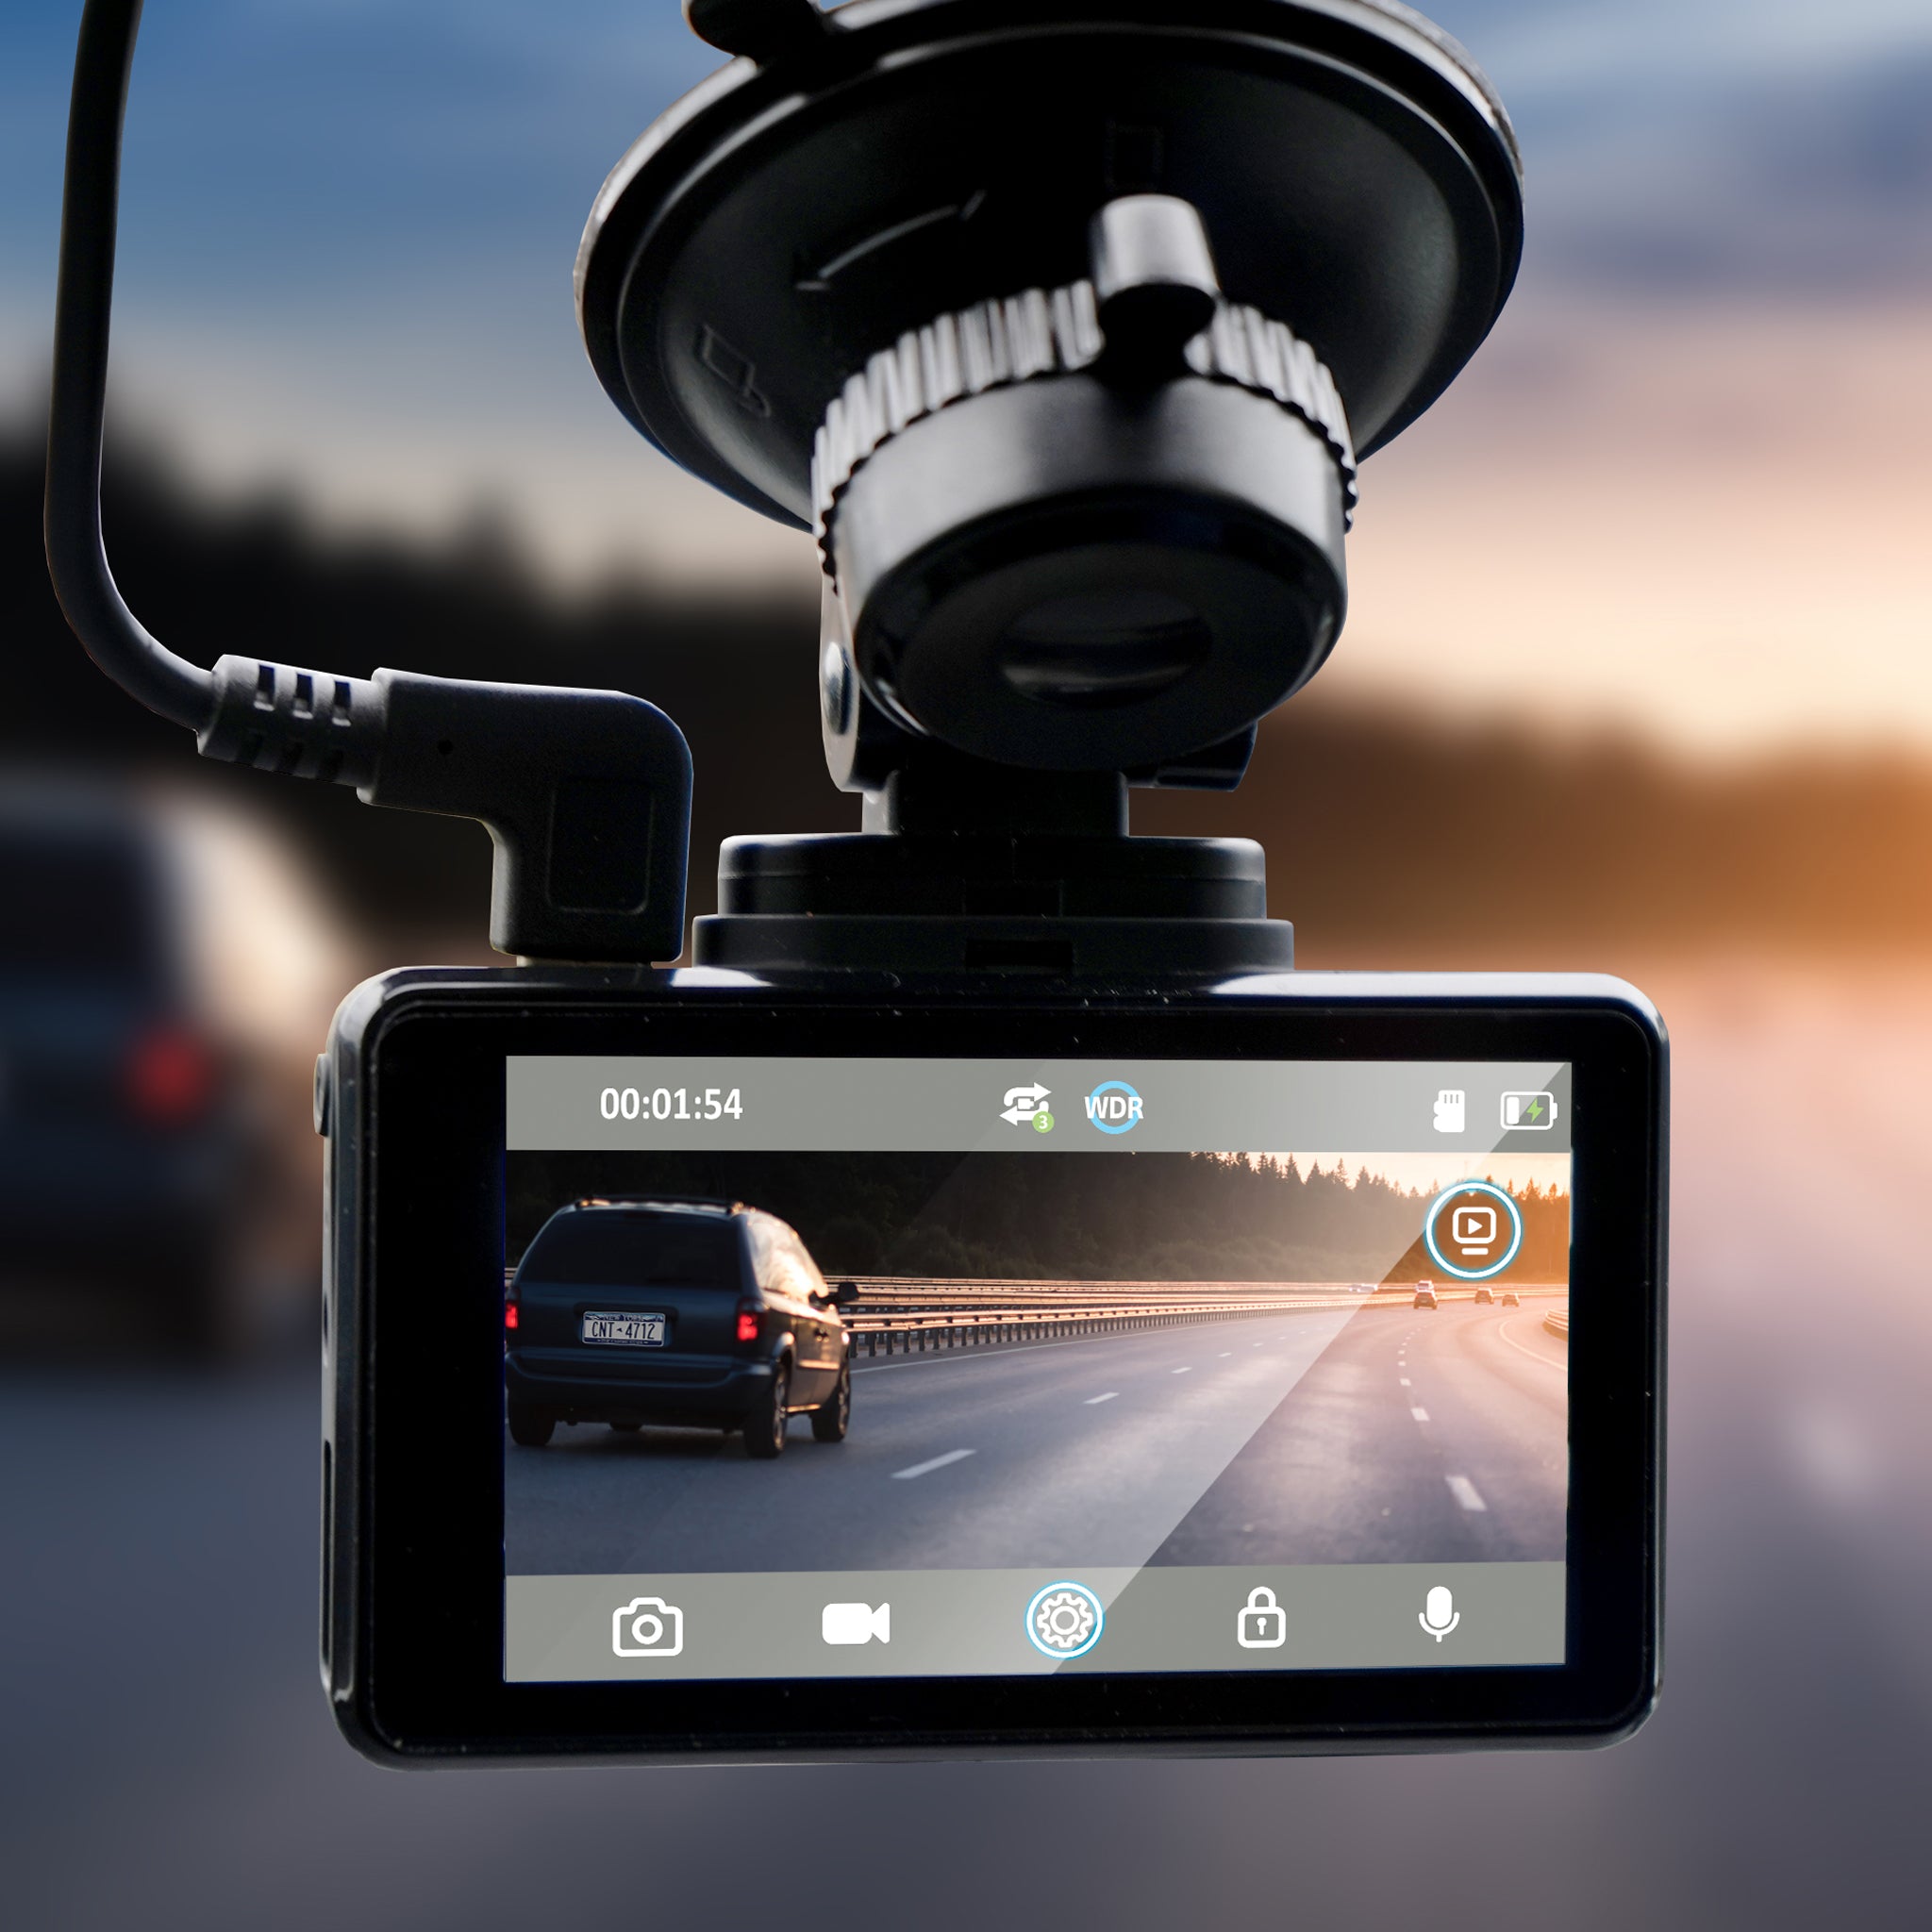 Car and Driver Eye2 Pro dash cam review: From worst to almost